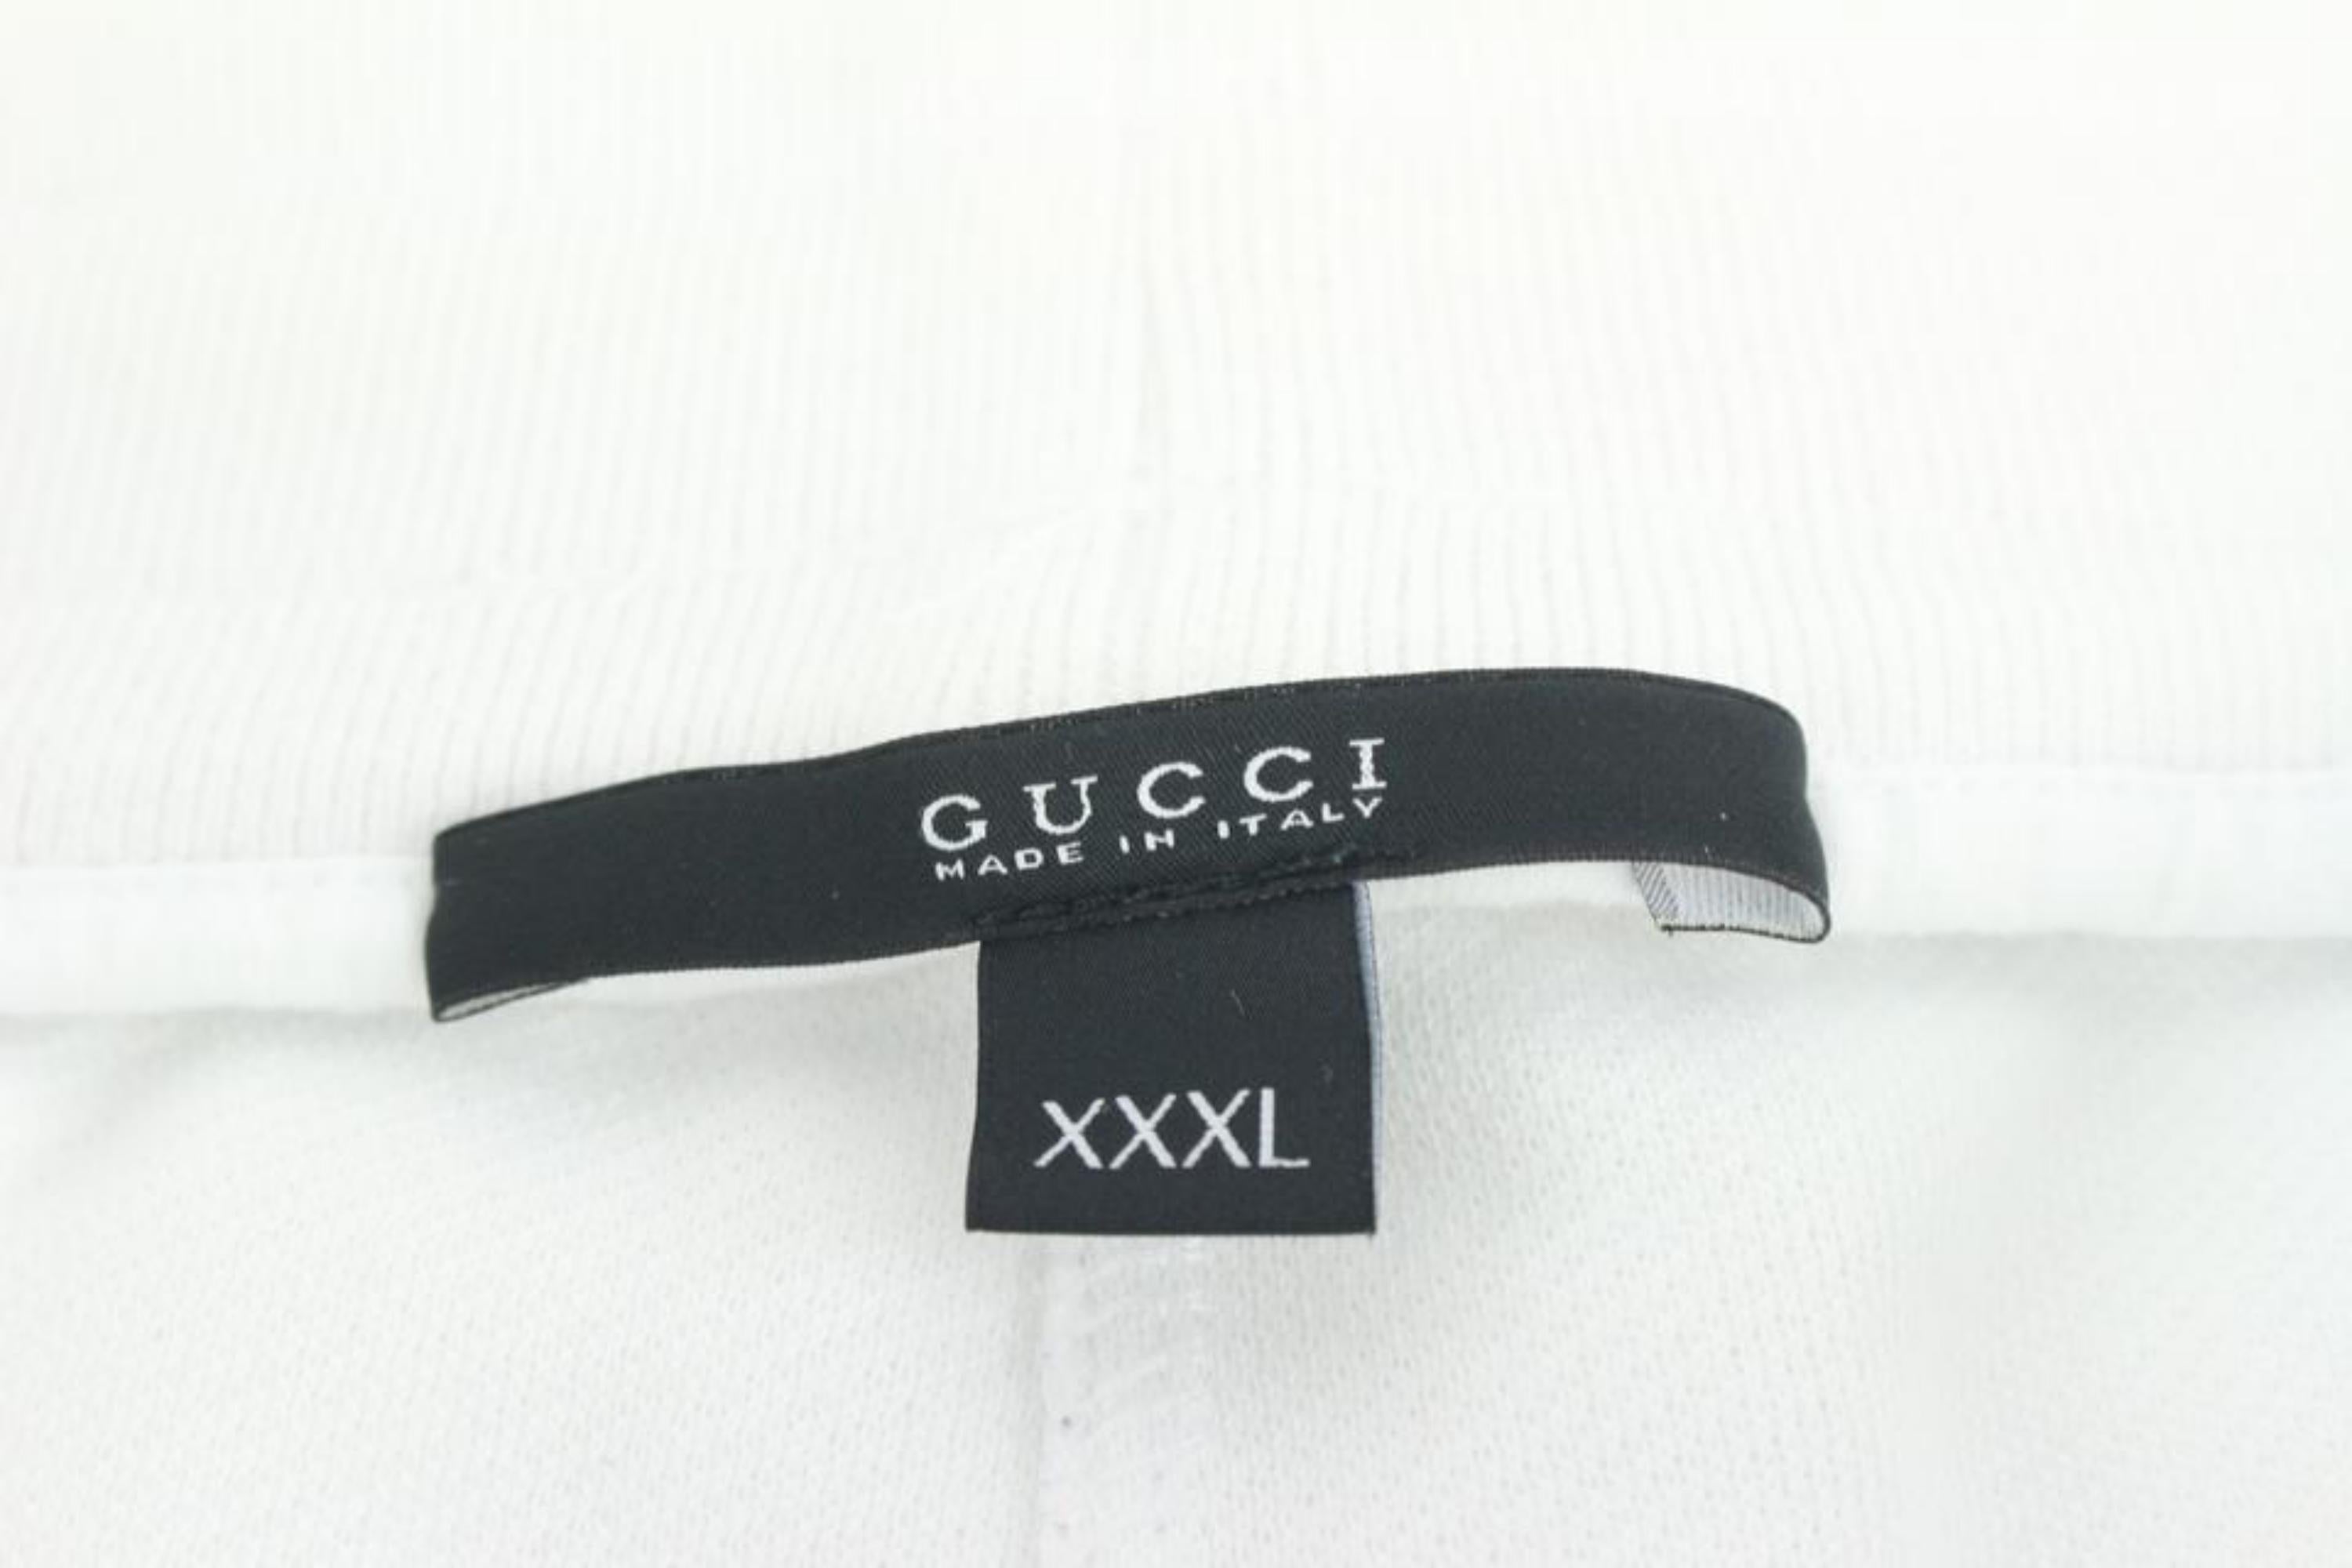 Gucci XXXL White Web Track Pants Jersey Sweat Pants Joggers 120g22
Made In: Italy
Measurements: Length:  24